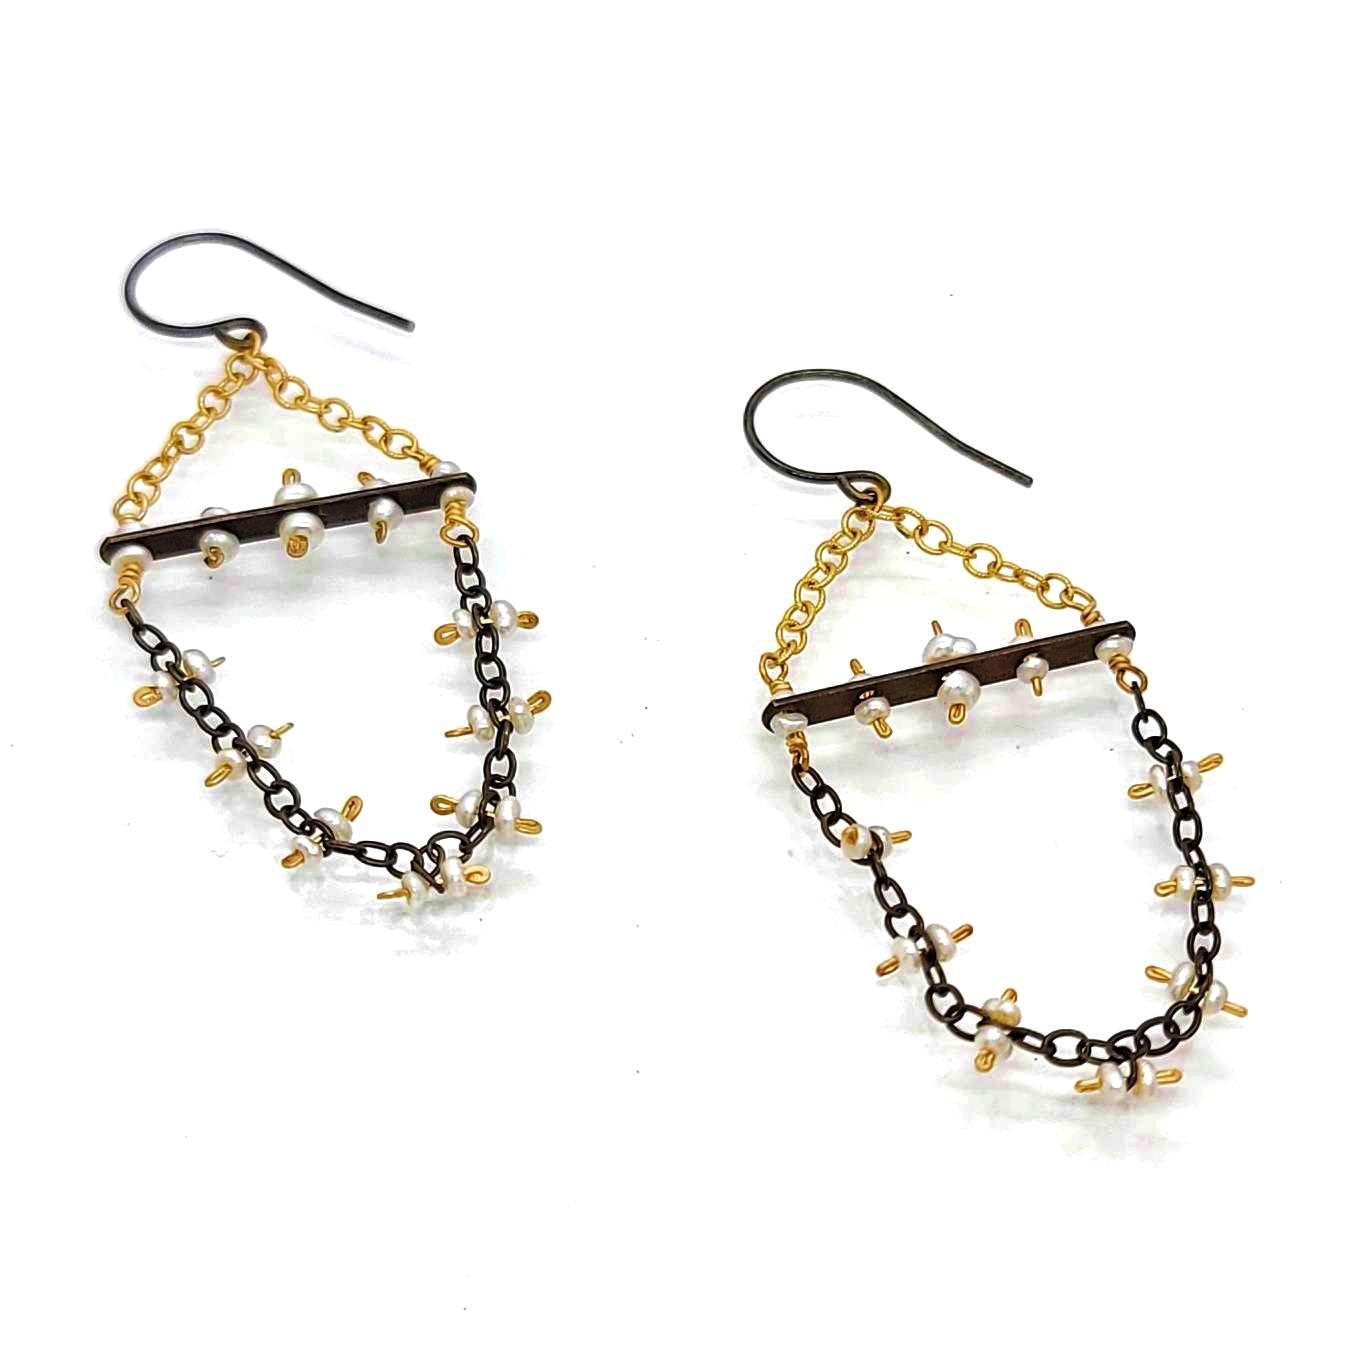 Earrings - Freshwater Pearl Chain Swag by Calliope Jewelry